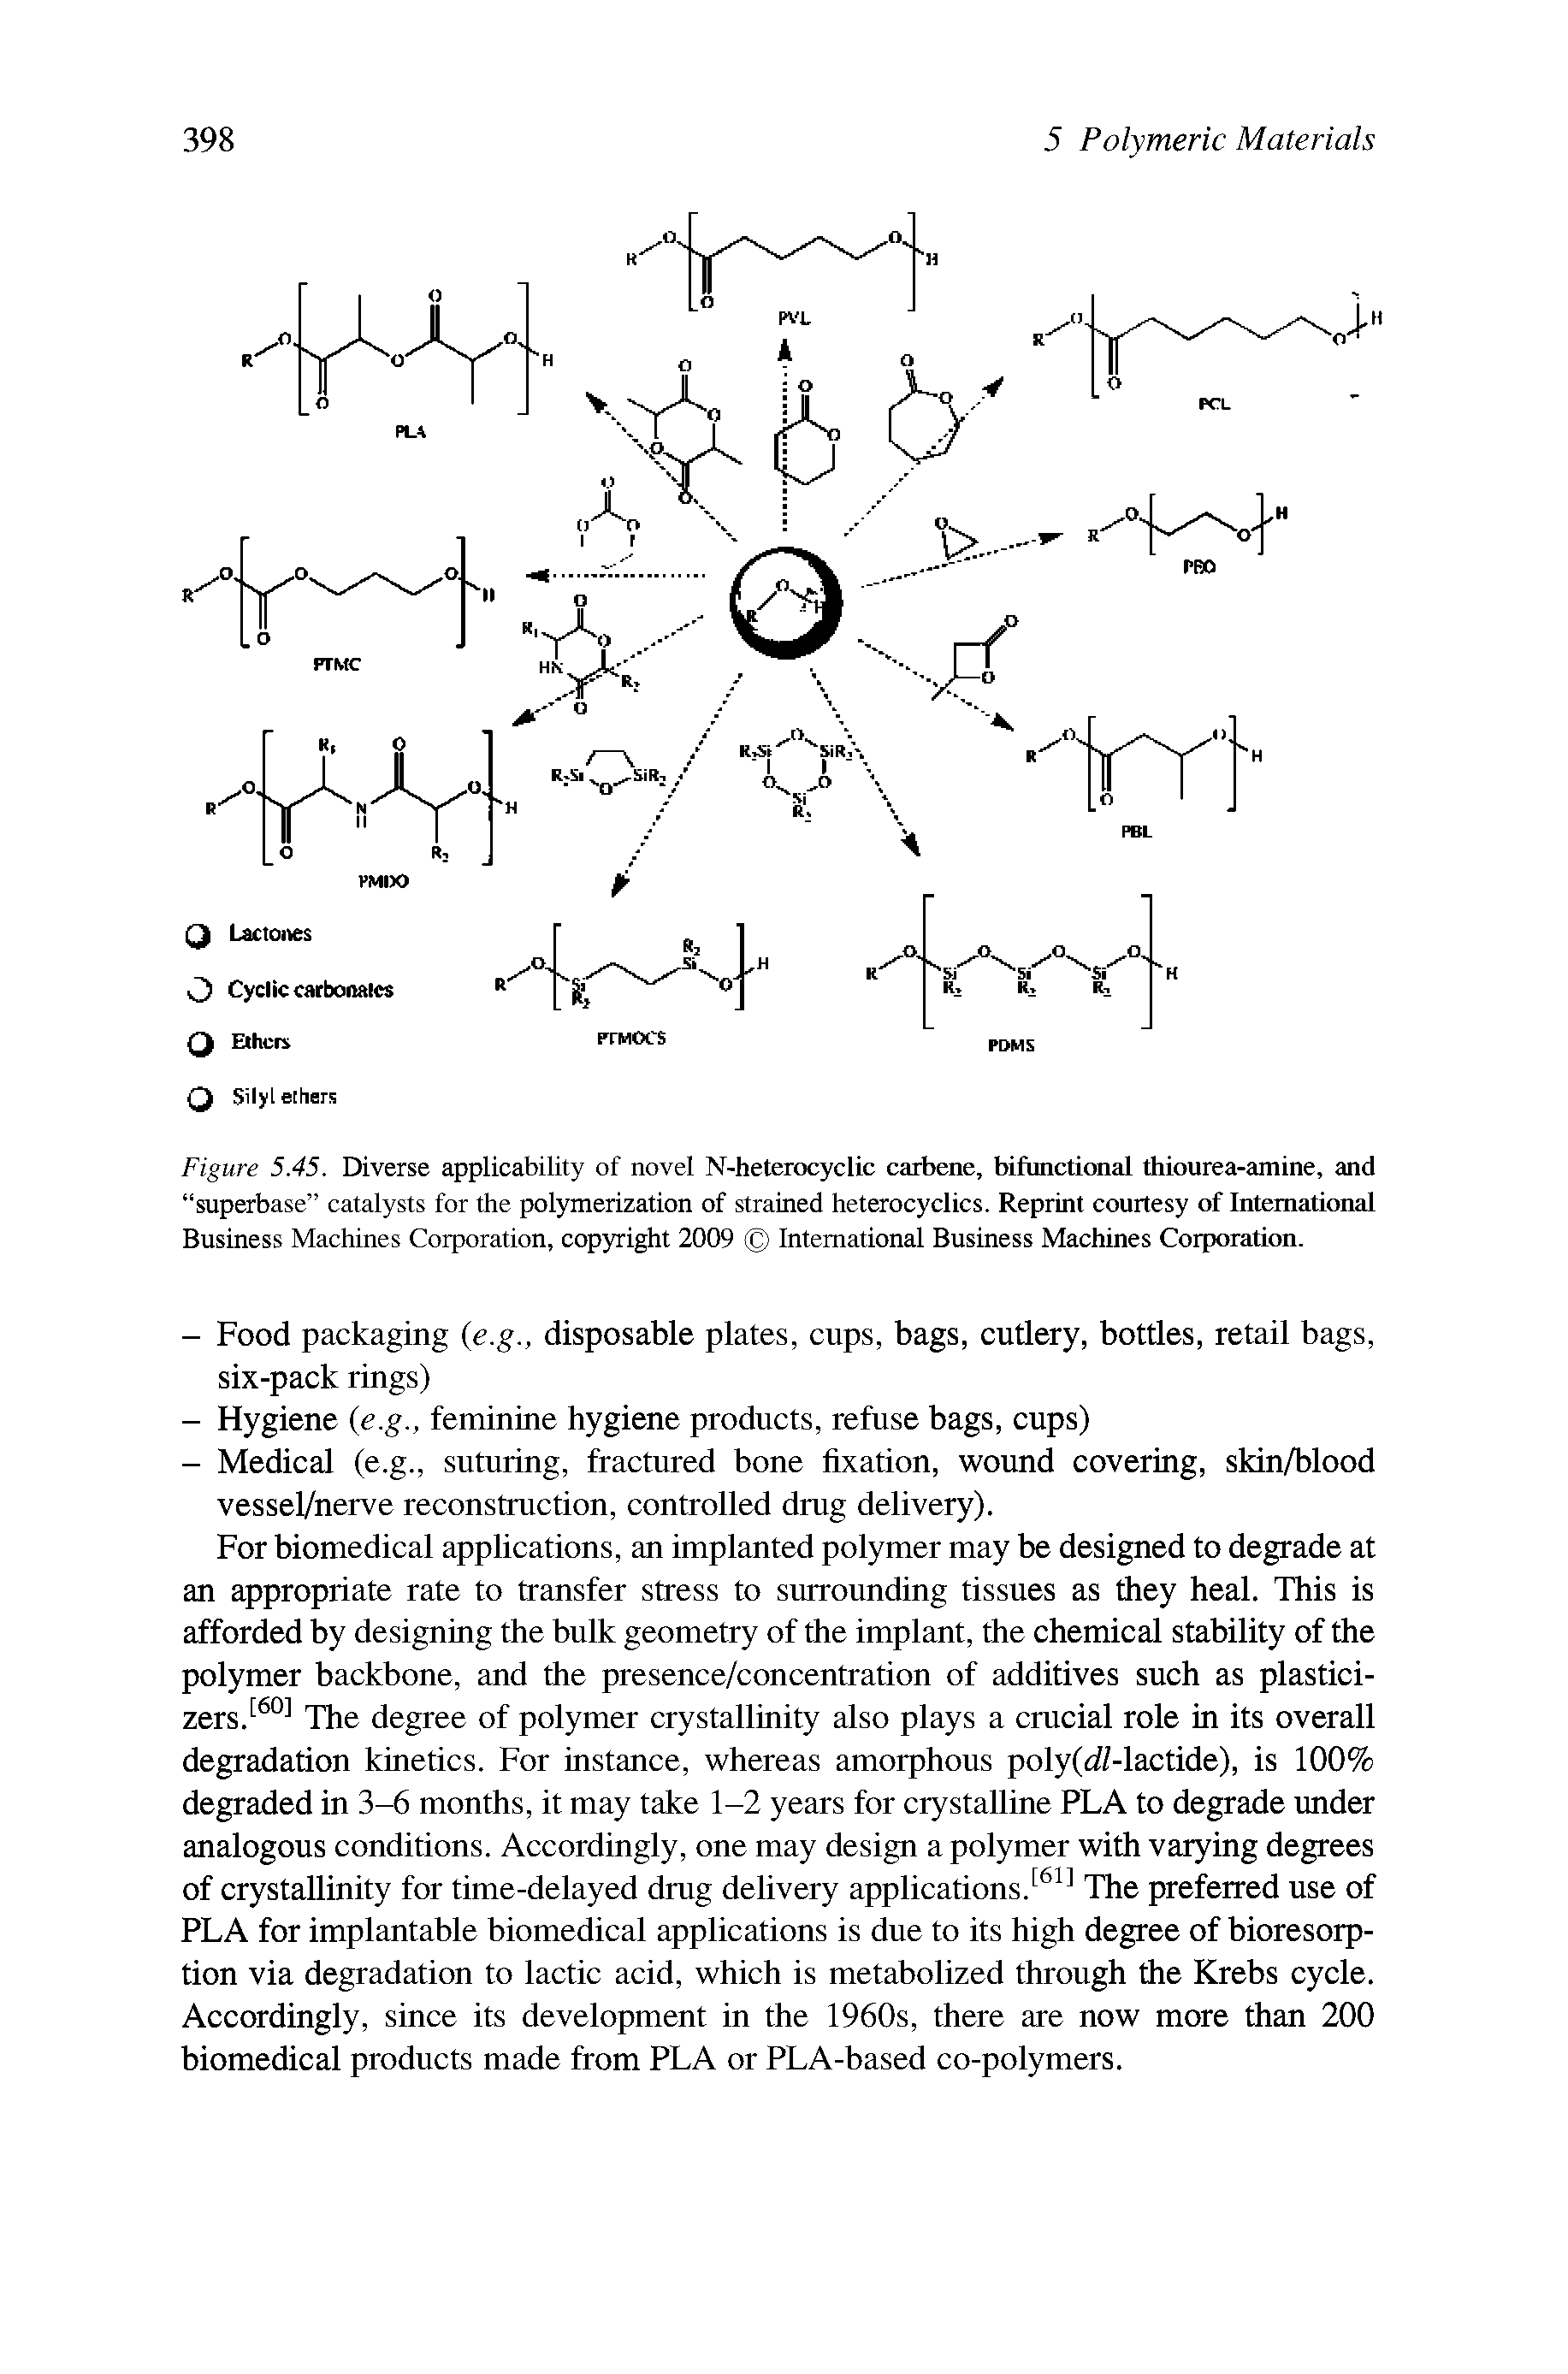 Figure 5.45. Diverse applicability of novel N-heterocyclic carbene, bifunctional thiourea amine, and superbase catalysts for the polymerization of strained heterocyclics. Reprint courtesy of International Business Machines Corporation, copyright 2009 International Business Machines Corporation.